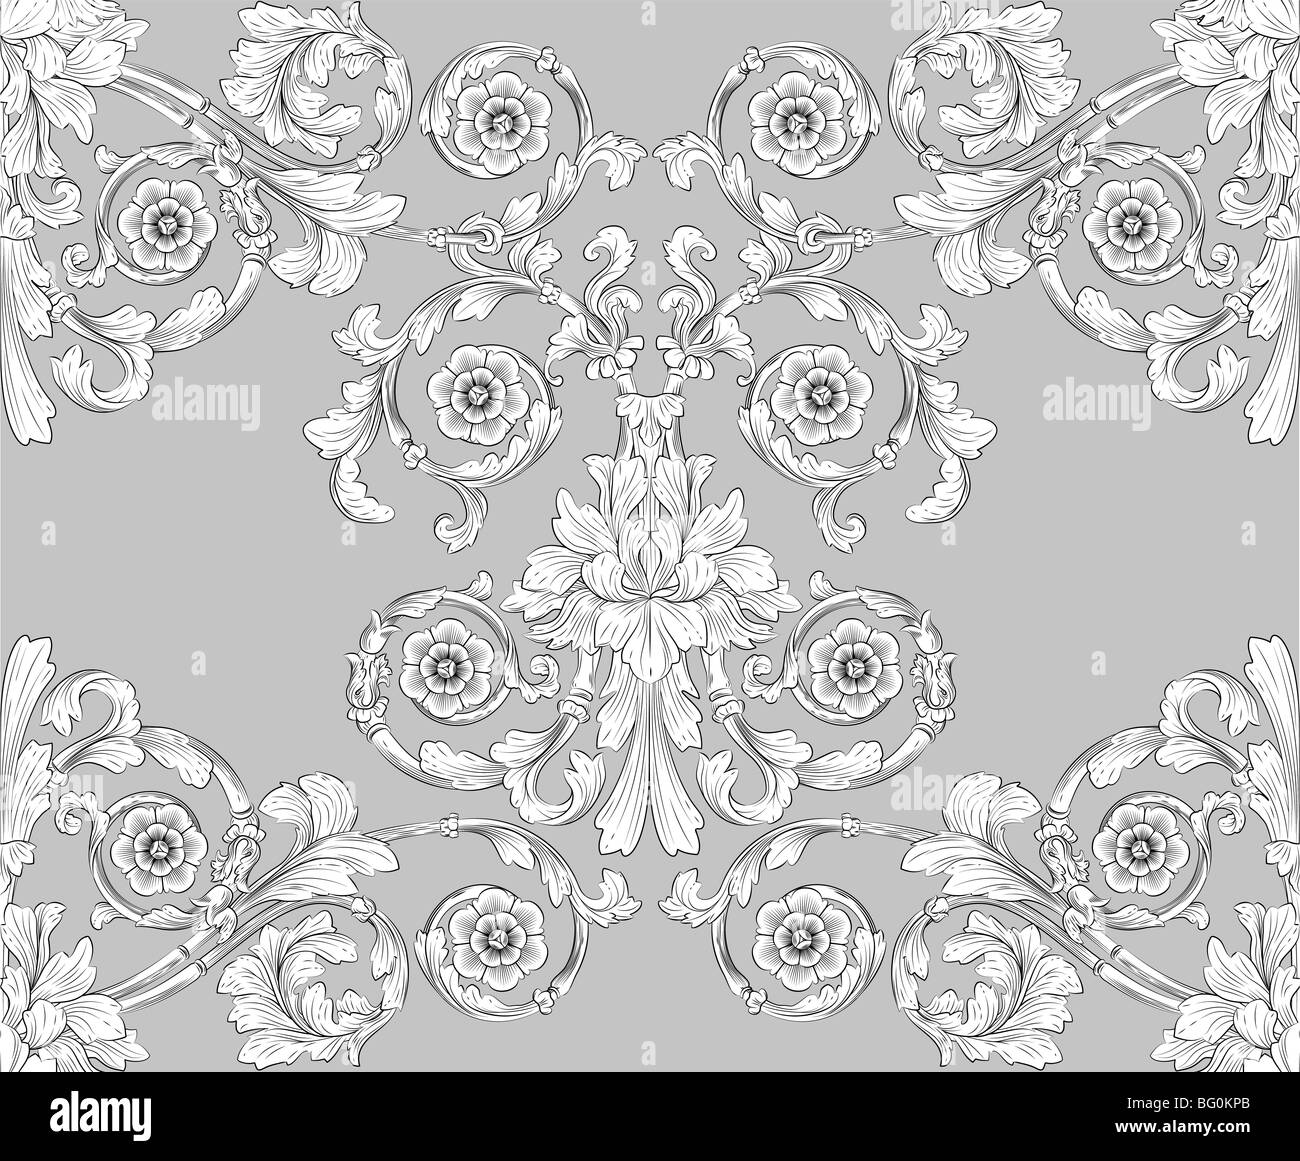 seamless tiling floral wallpaper pattern Stock Photo